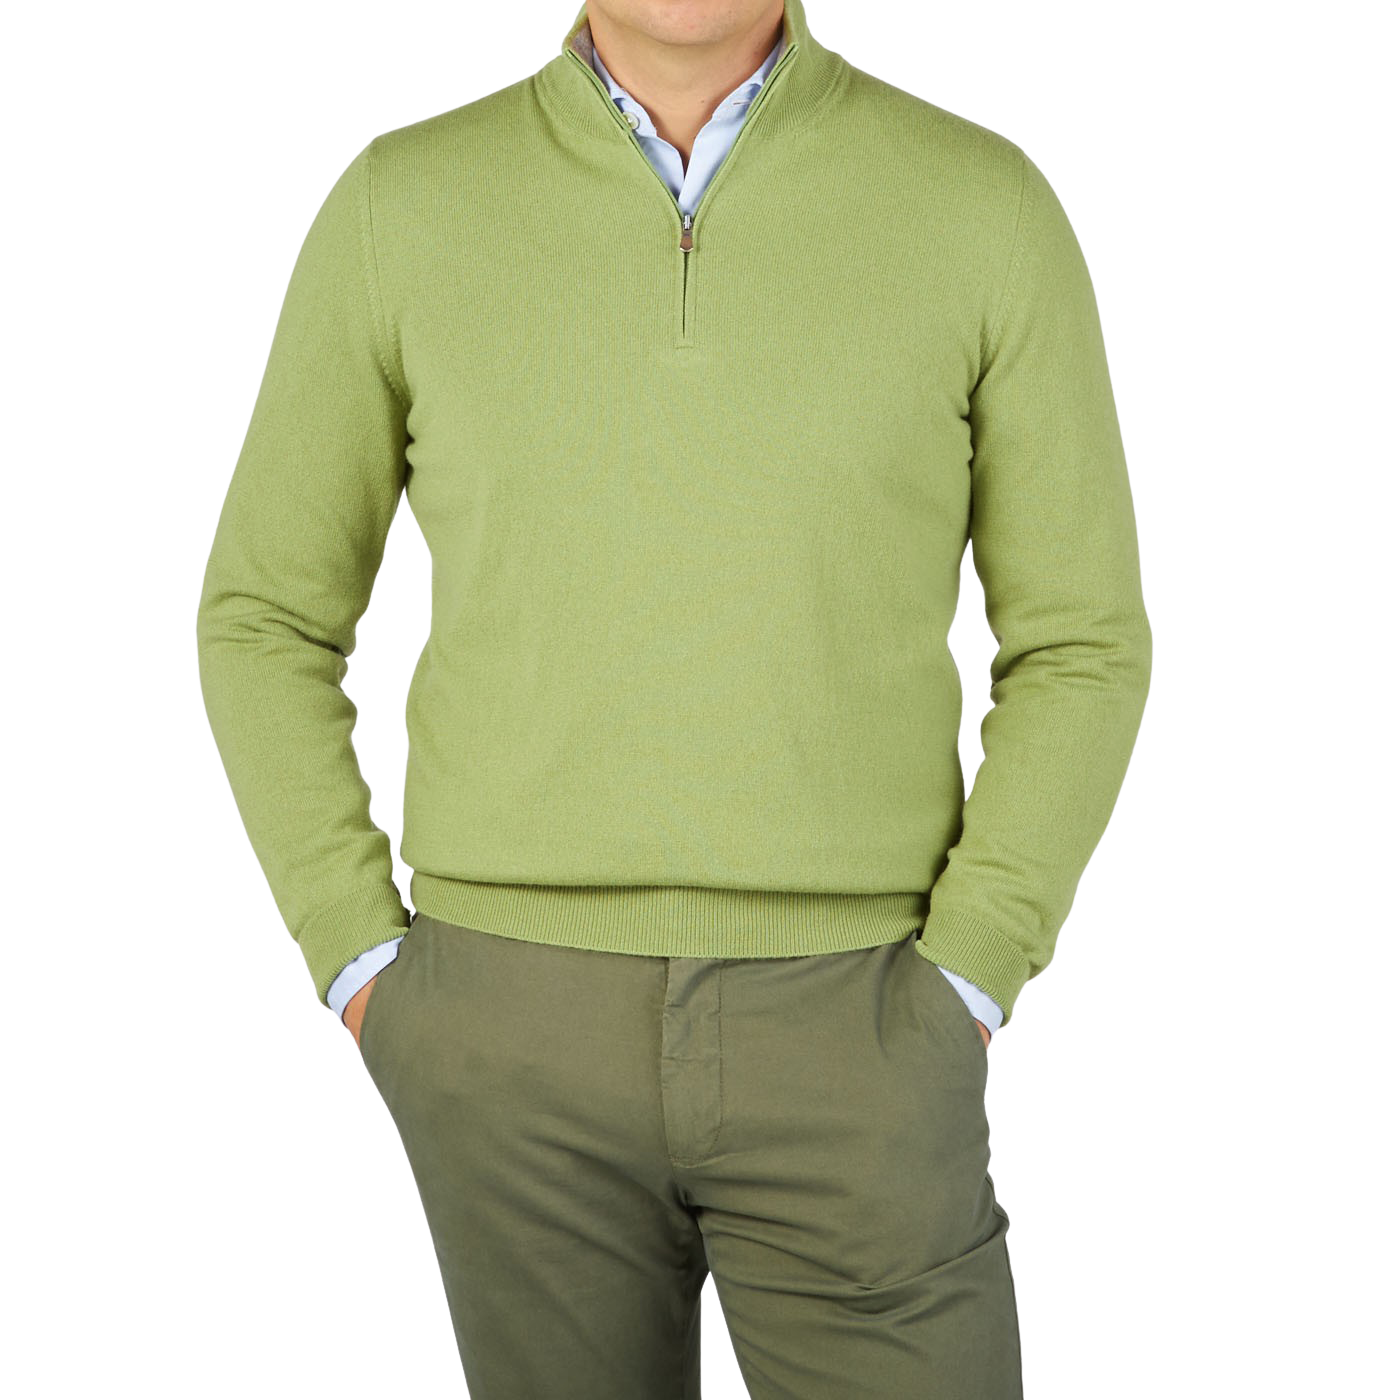 Gran Sasso Lime Green Cashmere 1:4 Zip Sweater Front